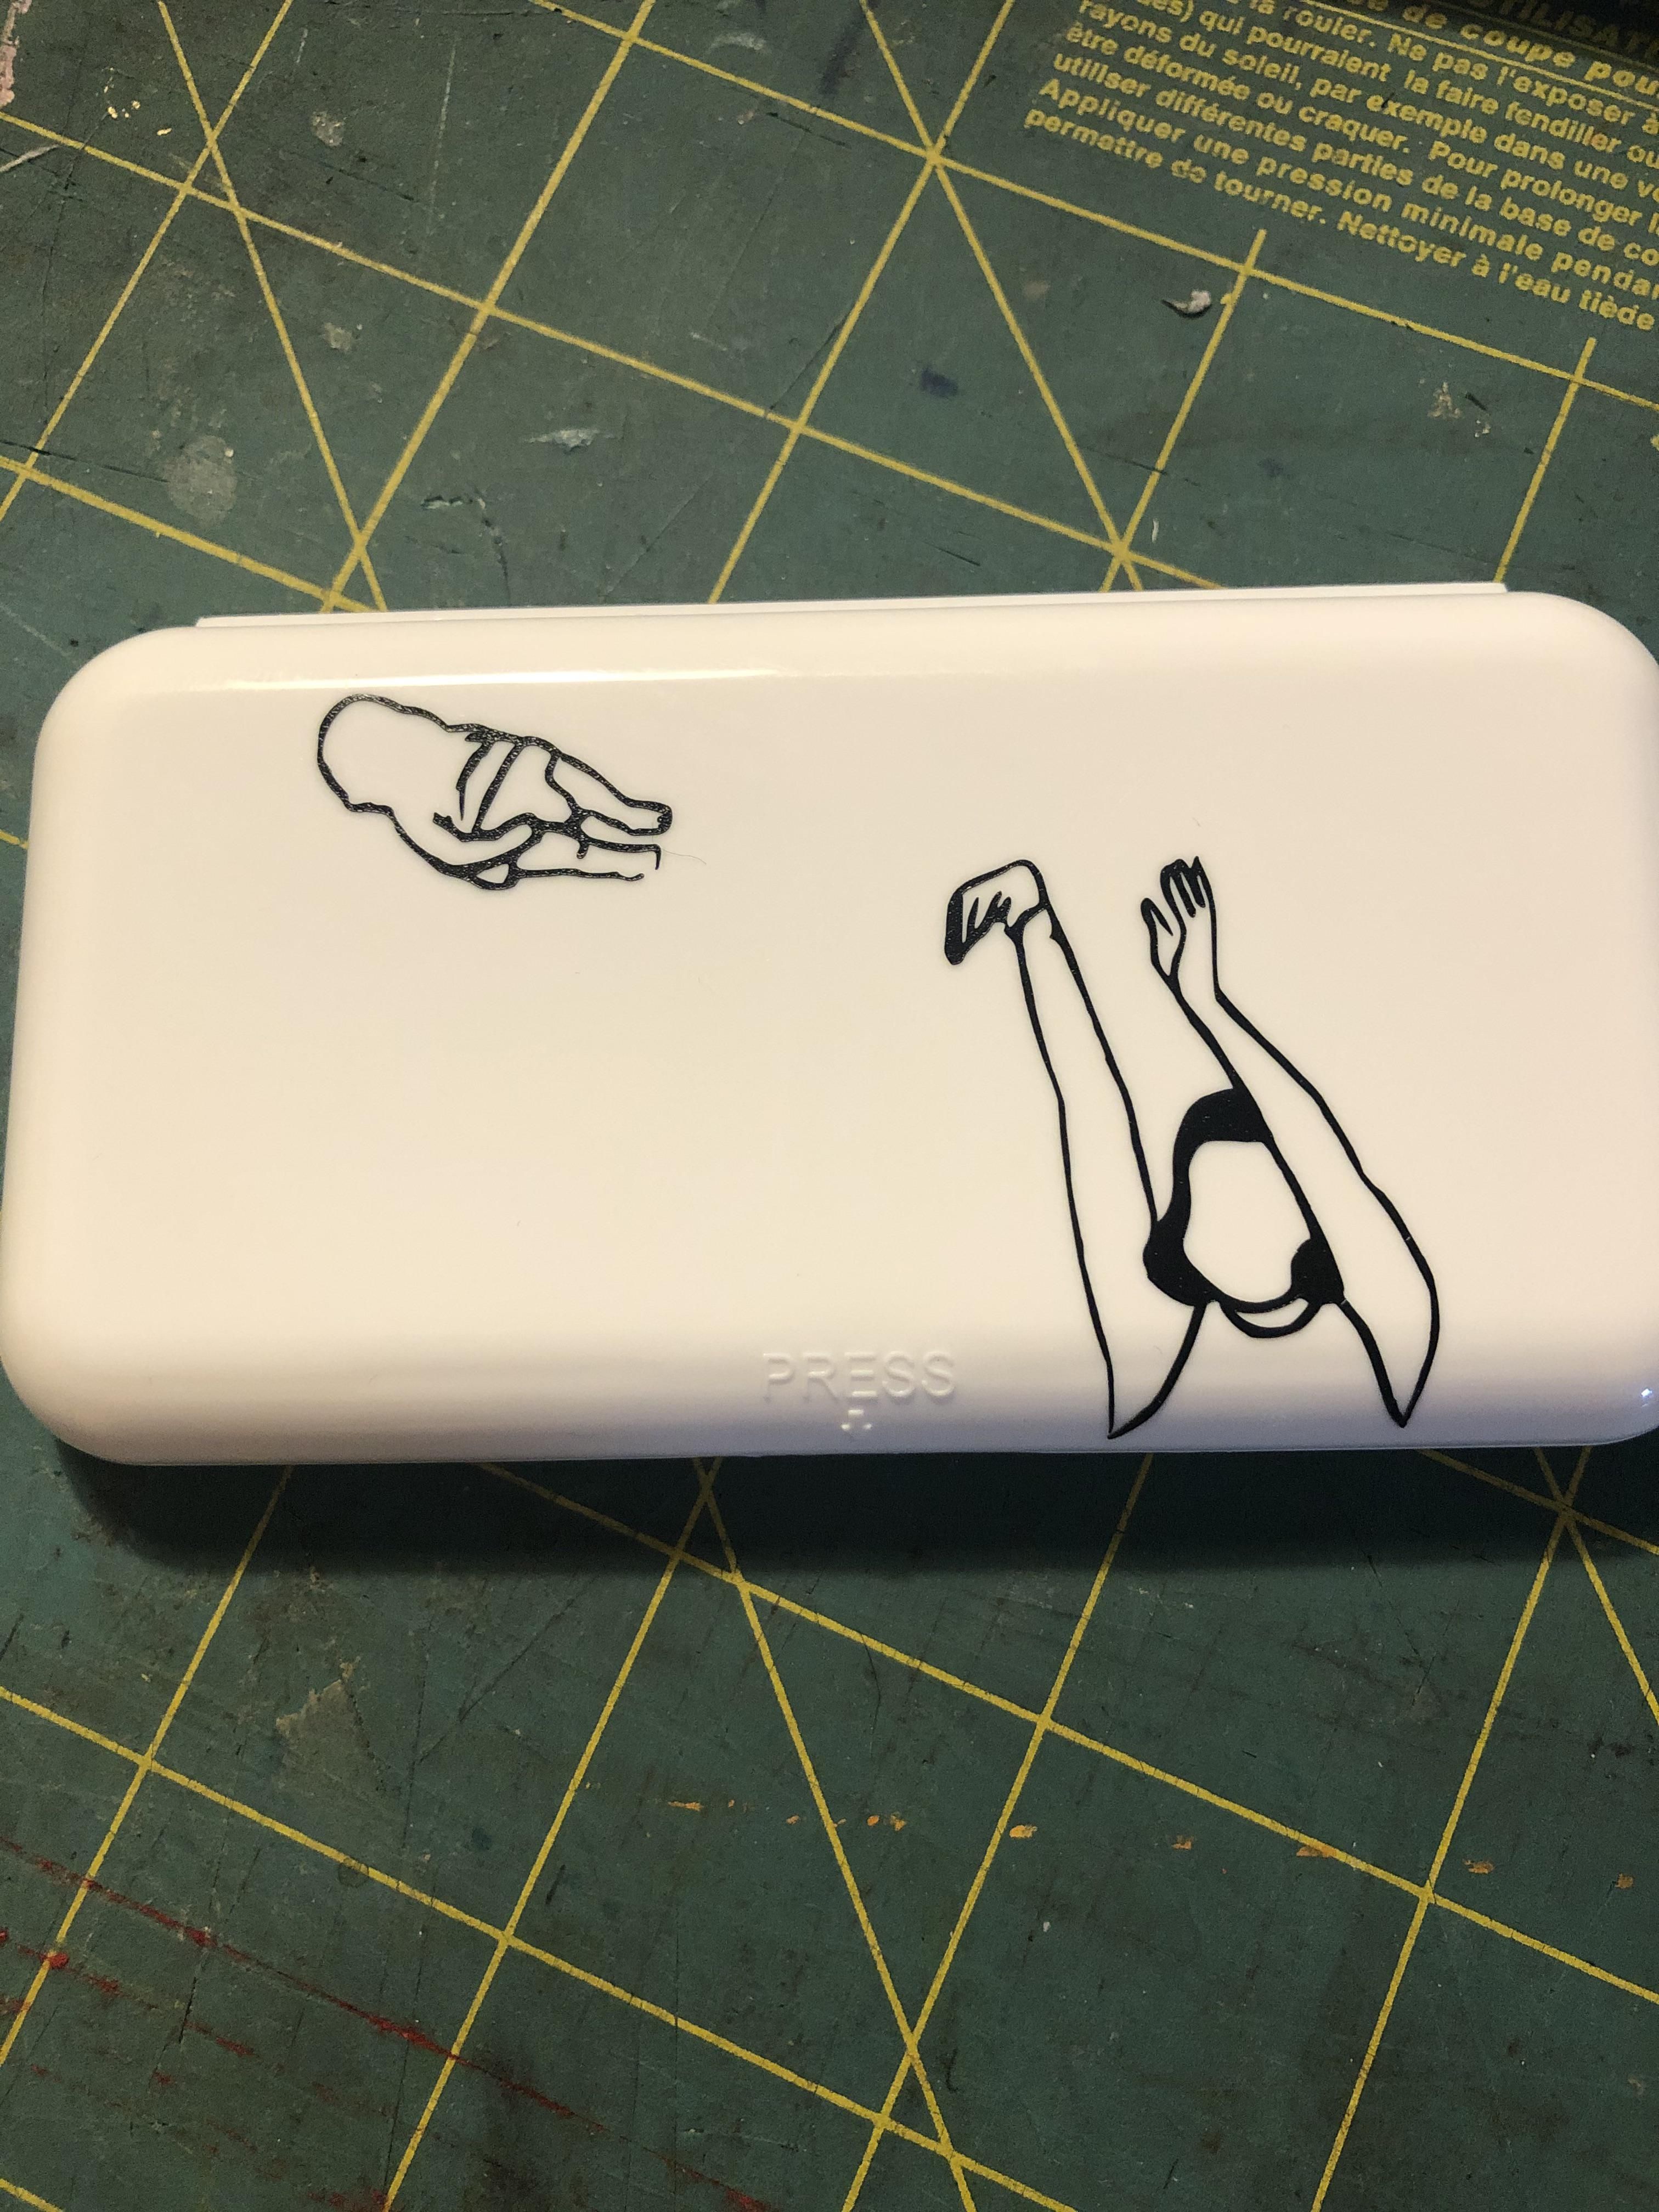 A friend told me to post this here, but my new birth control comes in a plain white container and I had to decorate it.